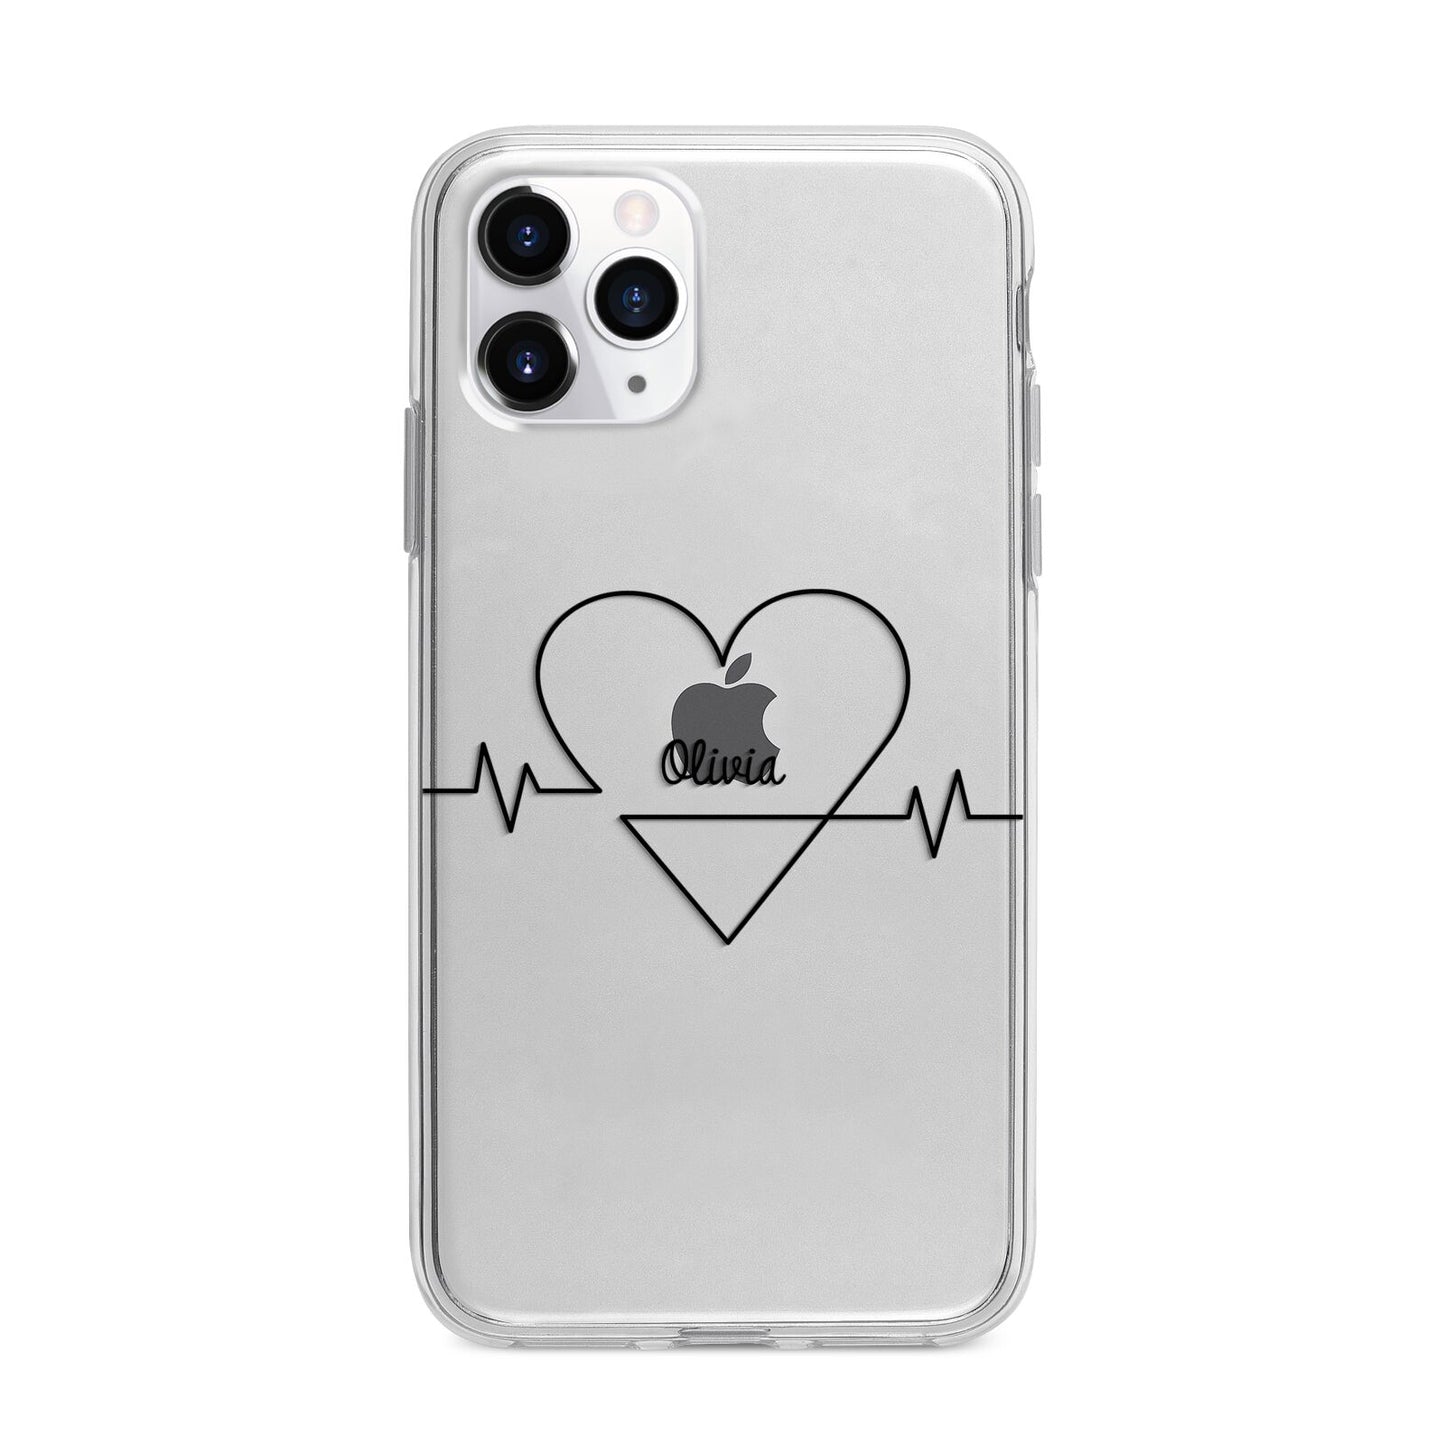 ECG Effect Heart Beats with Name Apple iPhone 11 Pro Max in Silver with Bumper Case